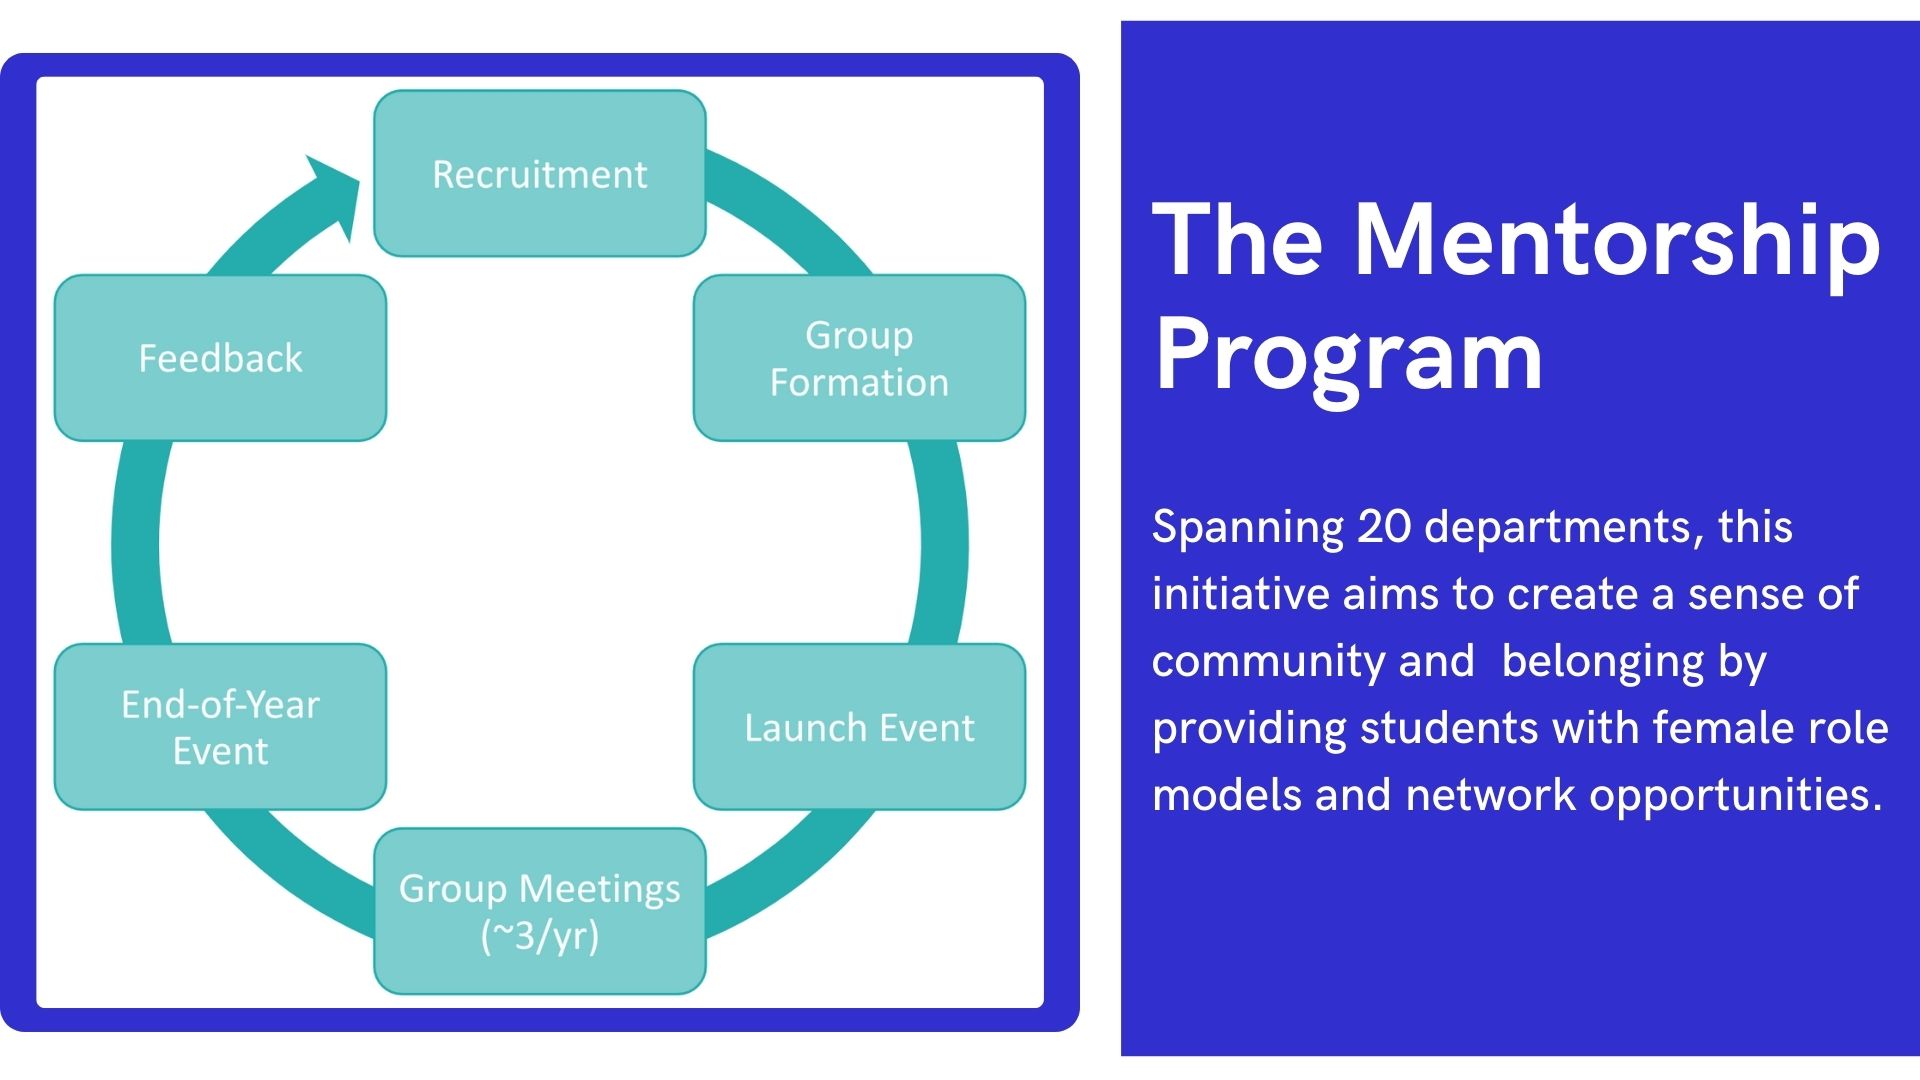 The Mentorship Program-Spanning 20 departments, this initiative aims to create a sense of community and  belonging by providing students with female role models and network opportunities. It starts with Recruitment, followed by group formation, event launch, group meetings 3 time per year, and end-of-year event and finally a feedback.